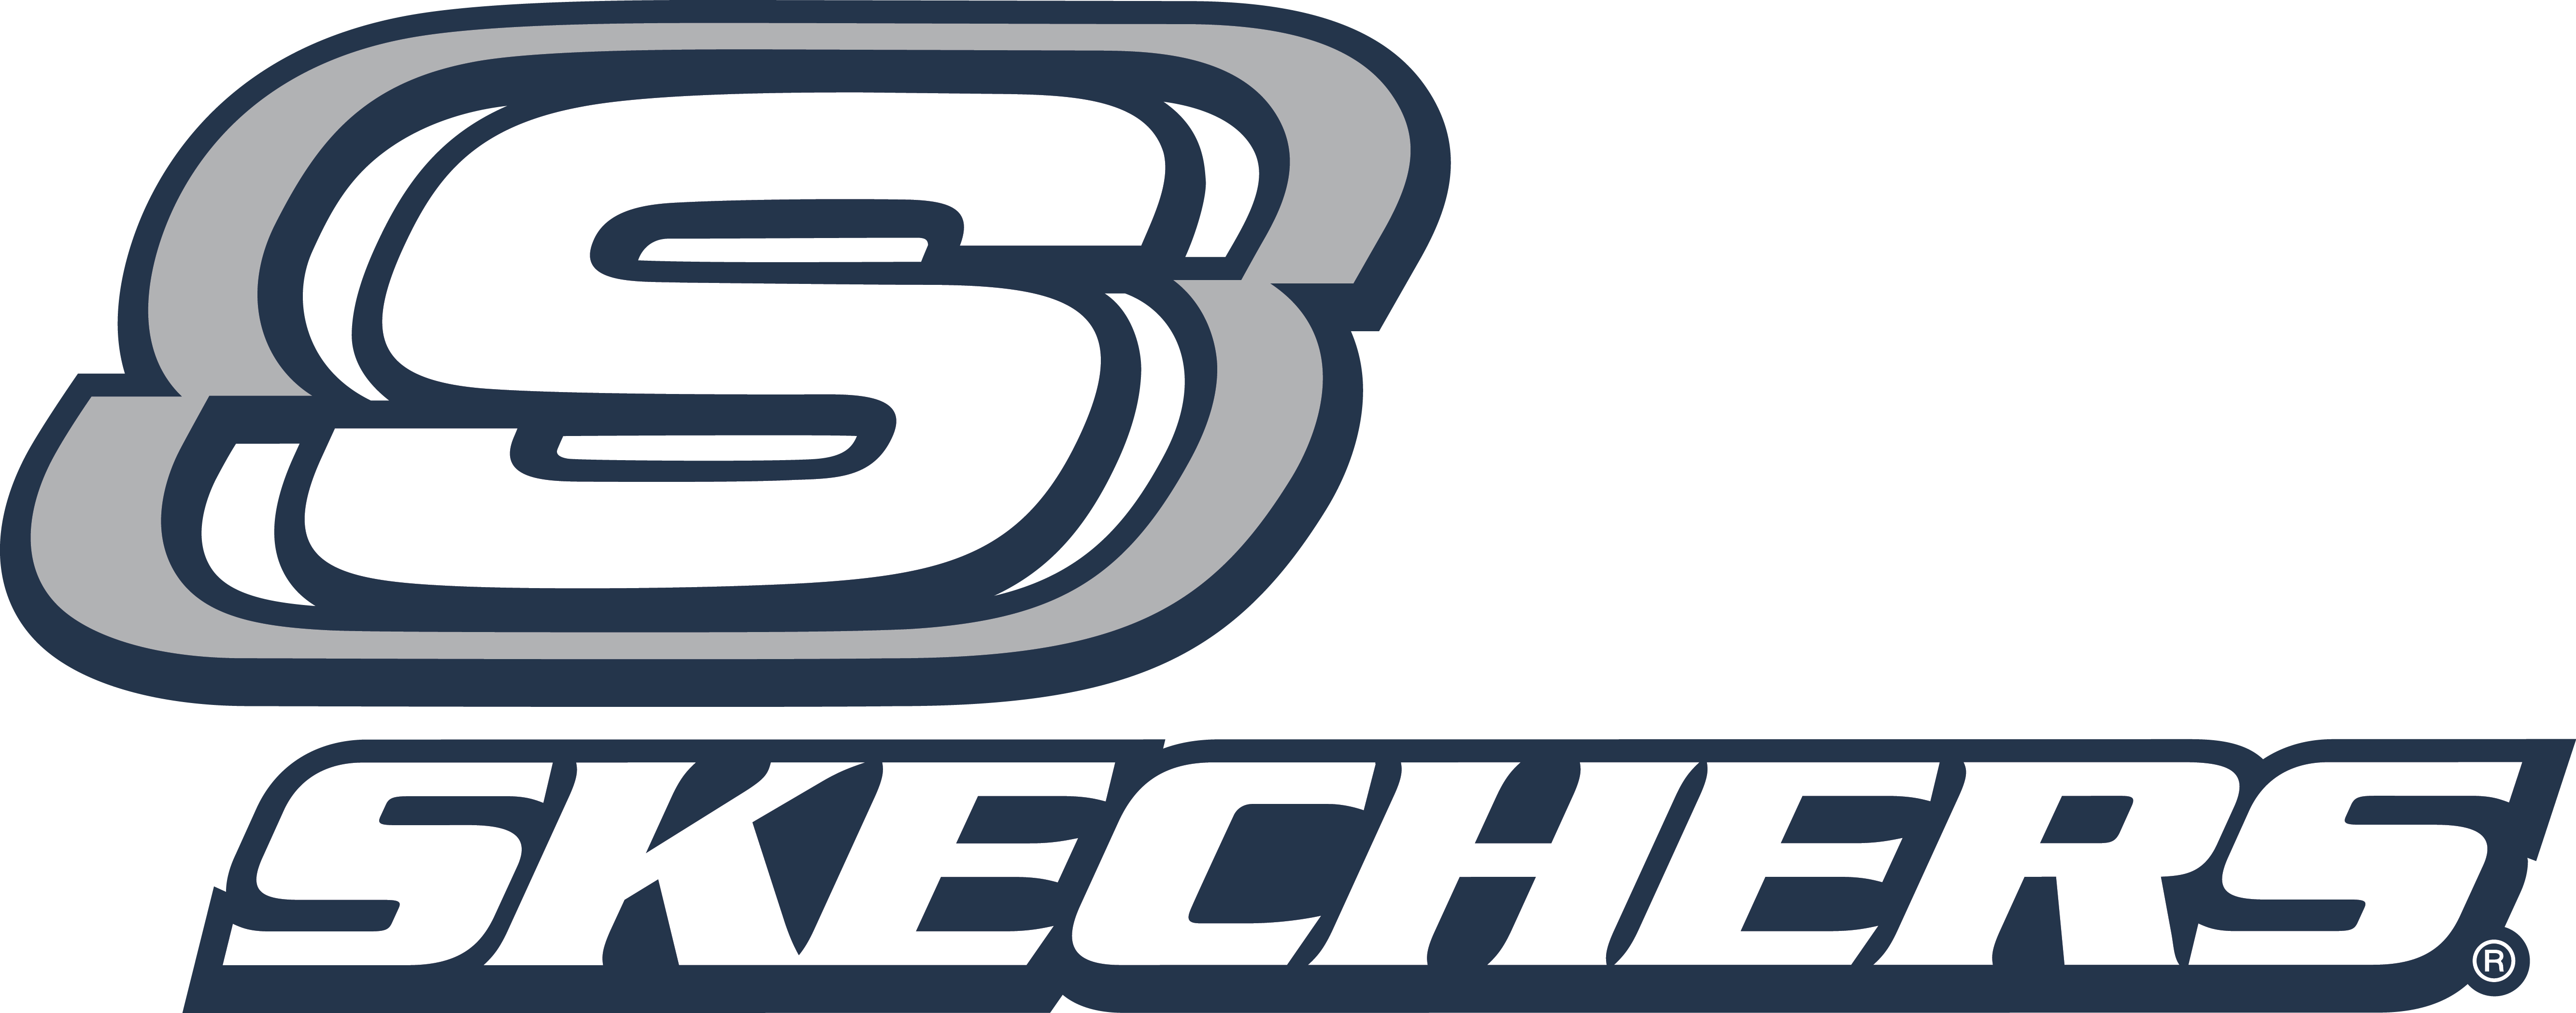 Find a large selection of men's Skechers footwear at Holmes Shoes in Peoria Metro Centre